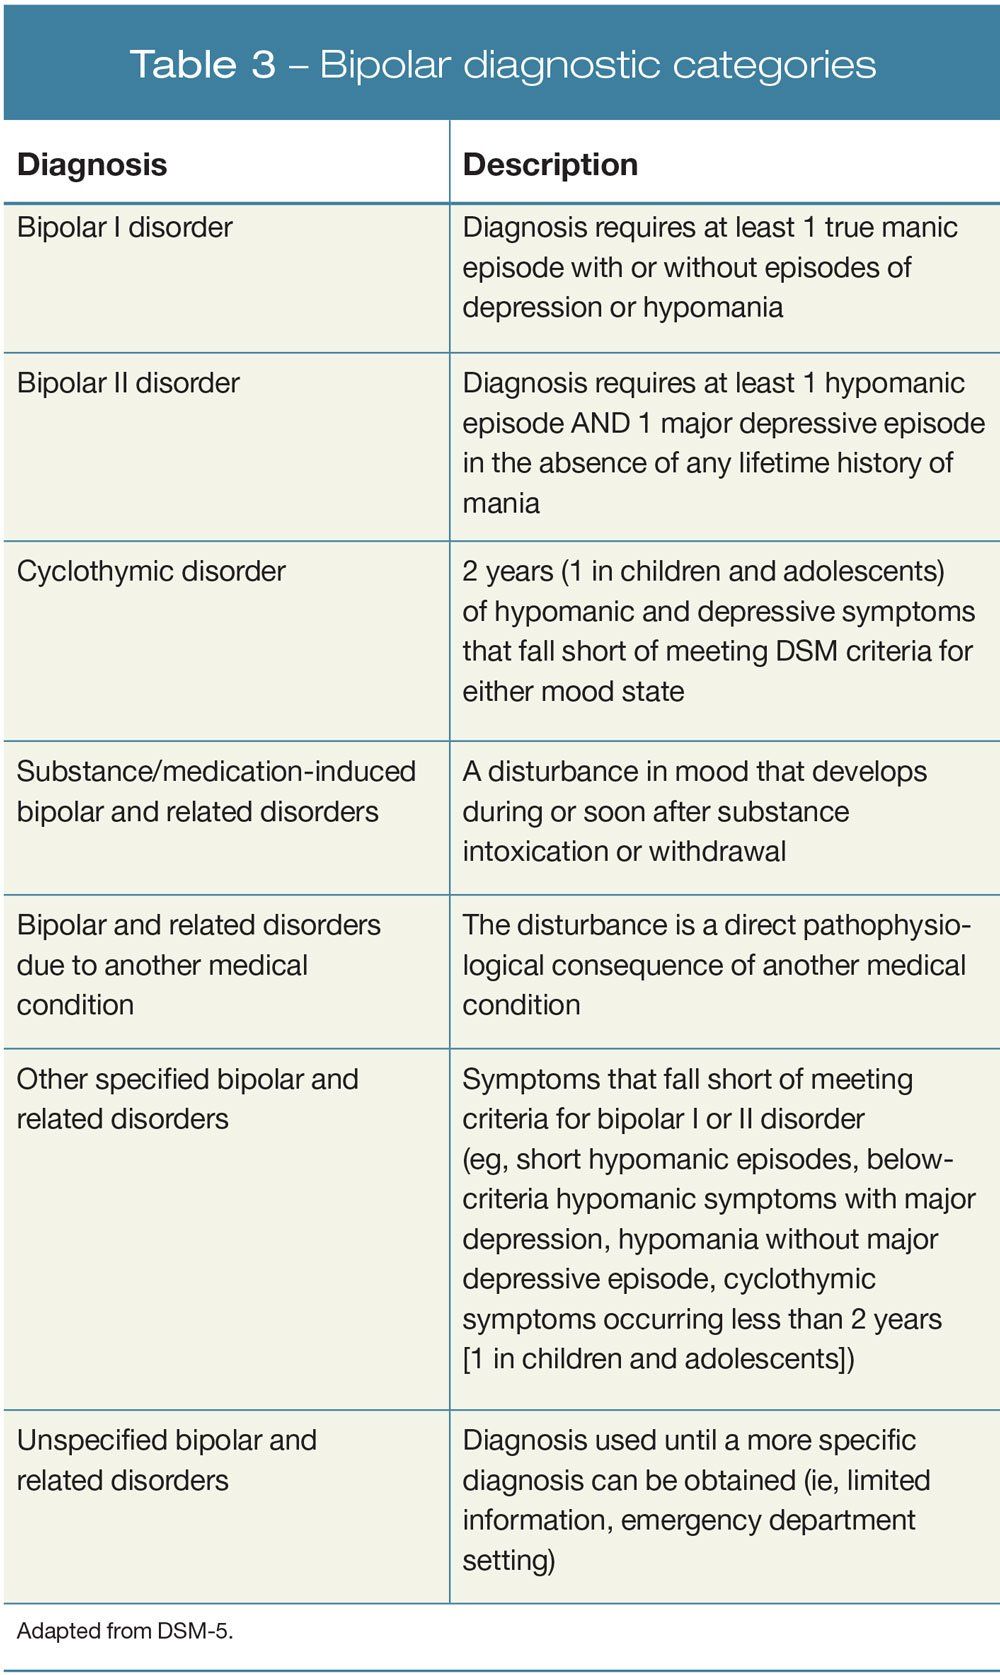 An Update On The Diagnosis And Treatment Of Bipolar Disorder Part 1 Mania Psychiatric Times